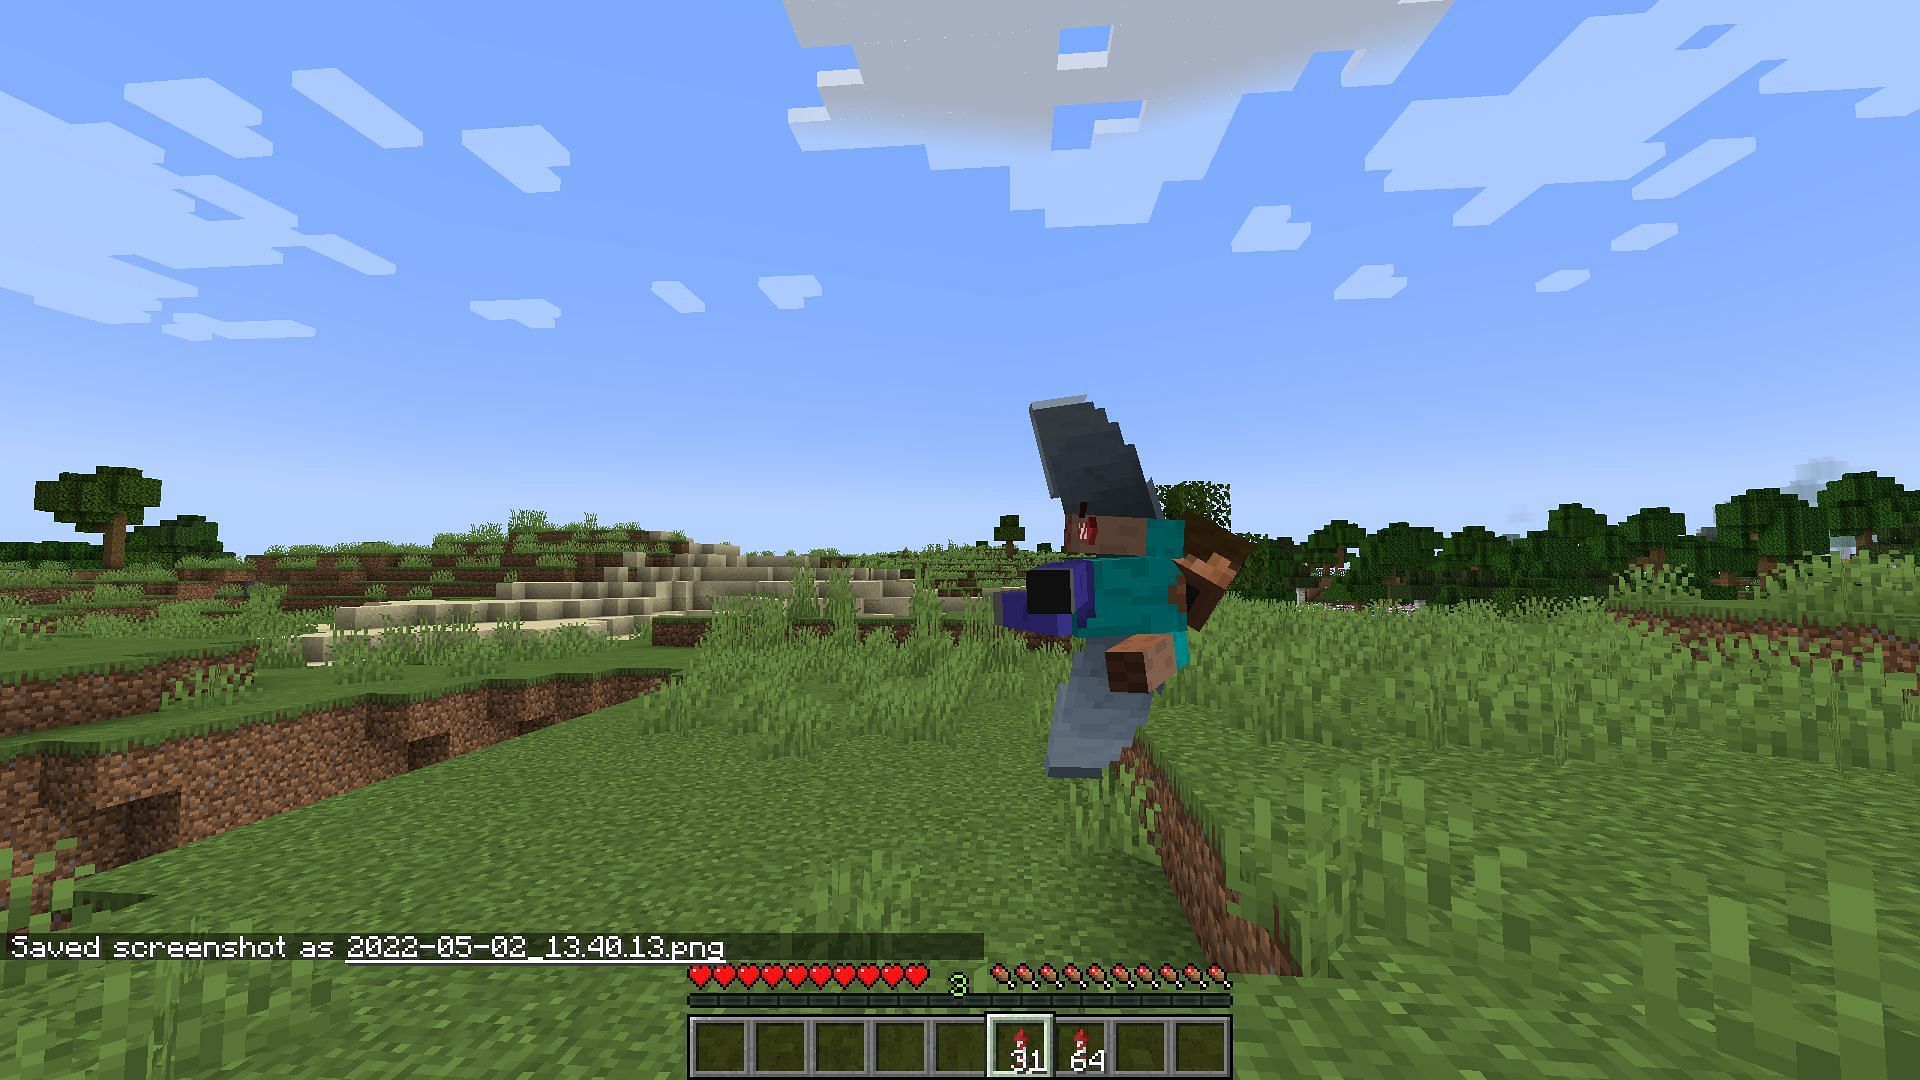 Turning just before landing drastically reduces speed (Image via Minecraft)